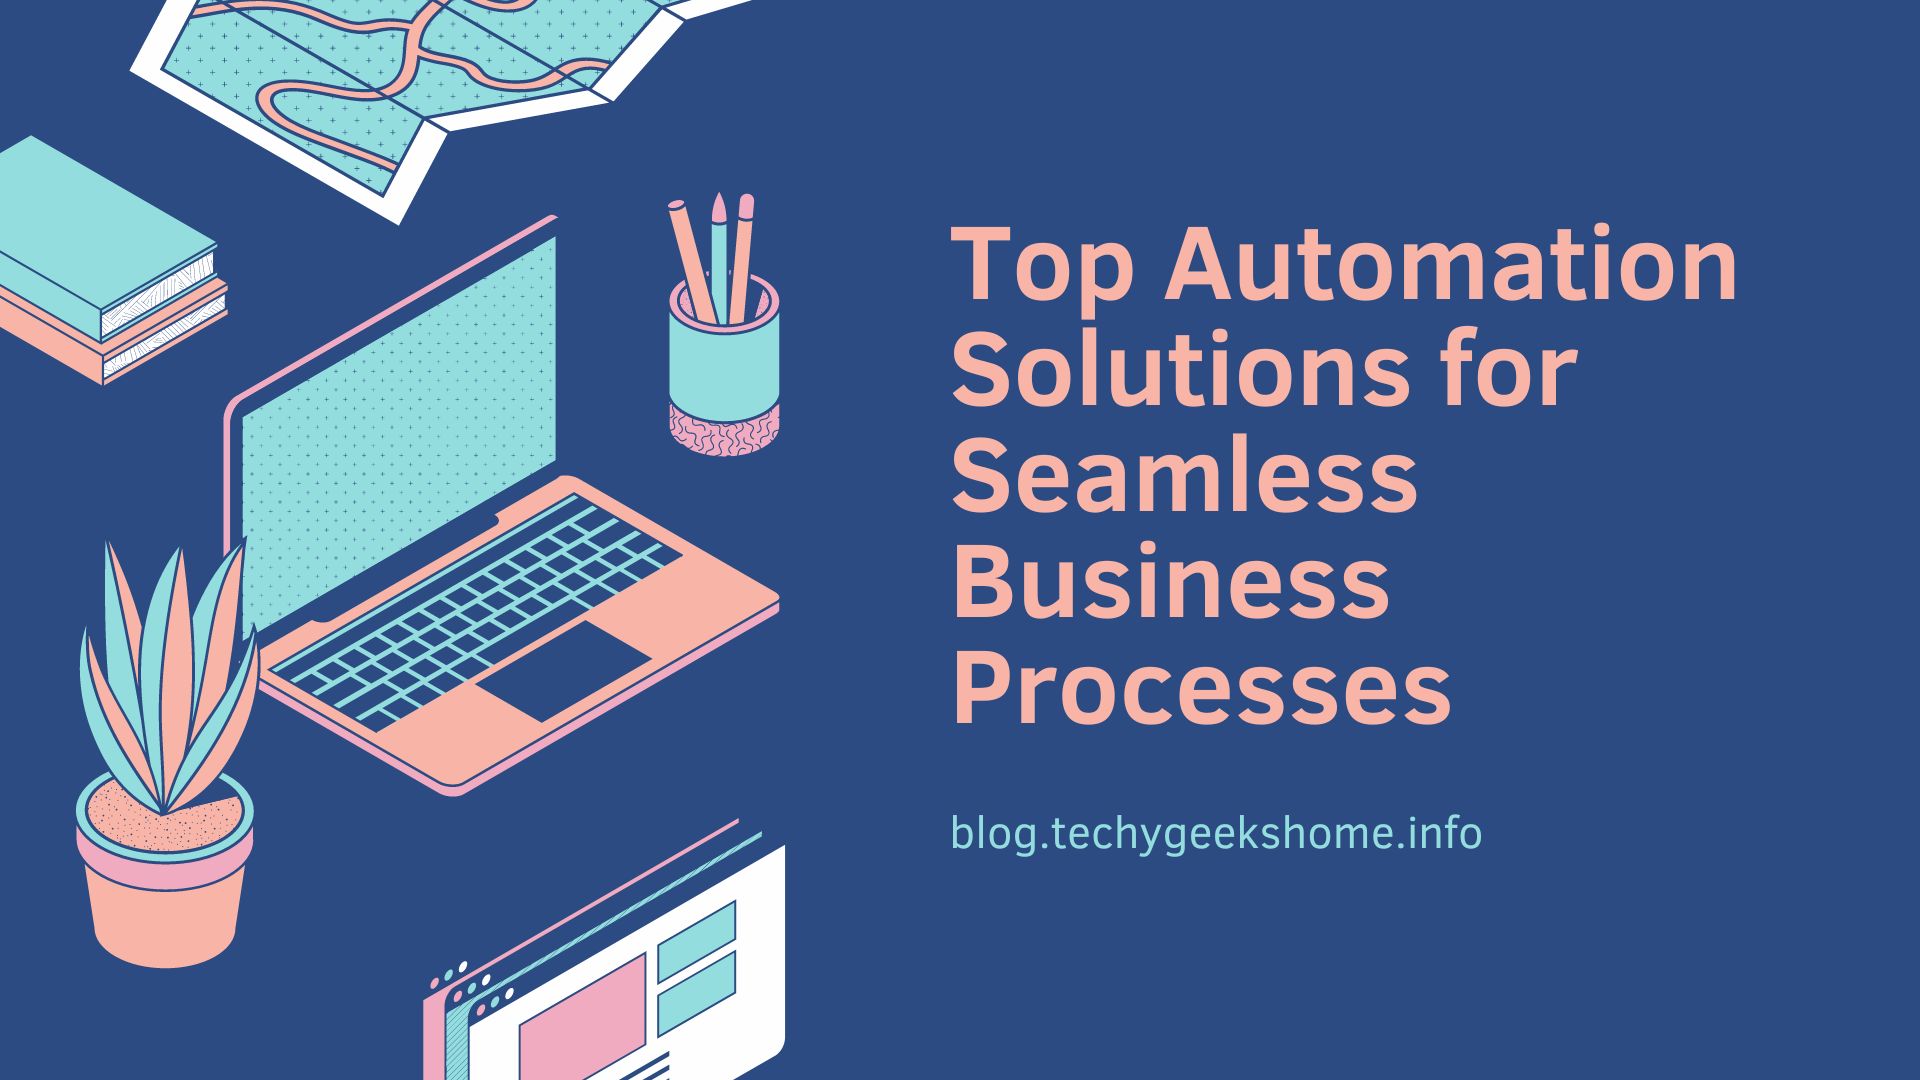 Top Automation Solutions for Seamless Business Processes